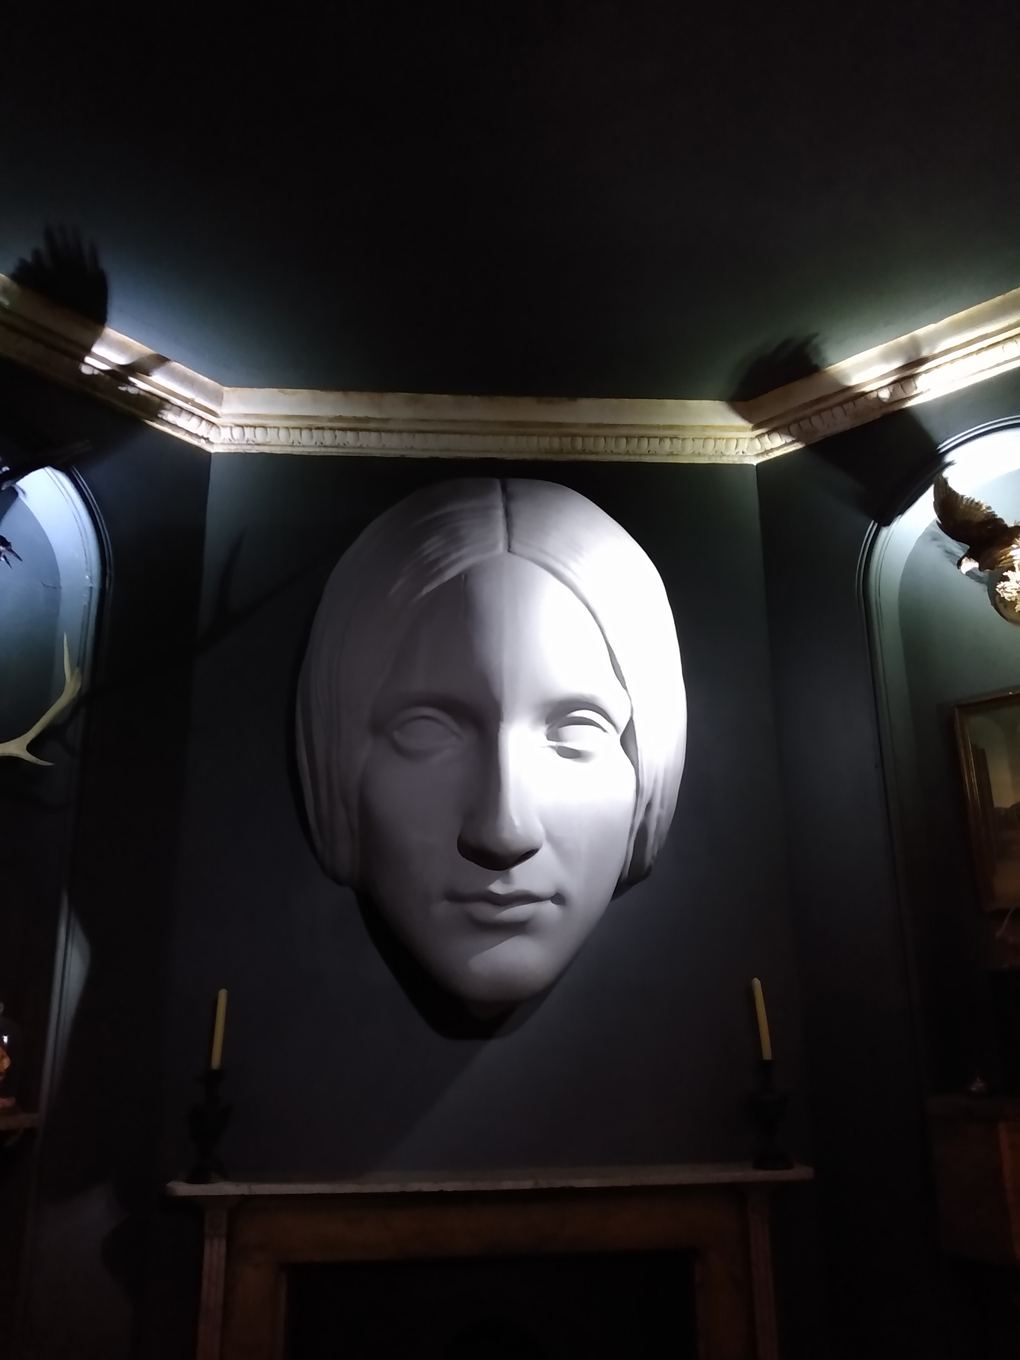 A large, white sculpt of Mary Shelley's face cast in shadow looks down